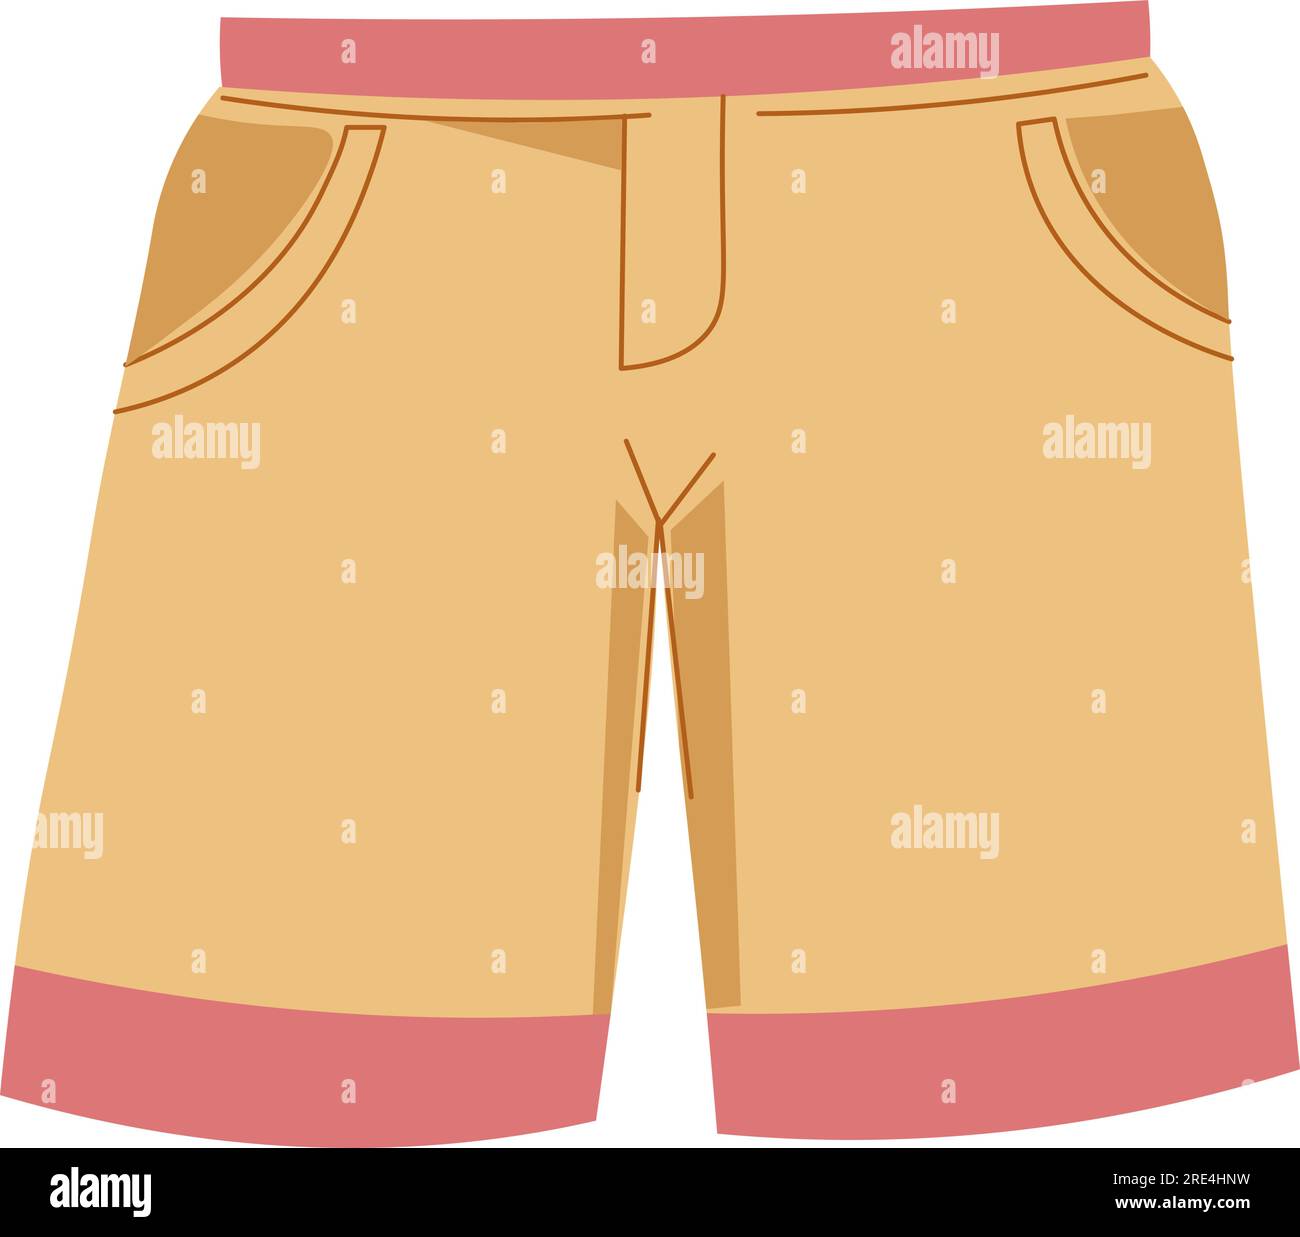 Kids clothing and fashionable models, isolated shorts with pockets. Comfortable sporty outerwear for boys and girls. Modern outfit for outdoors in sum Stock Vector